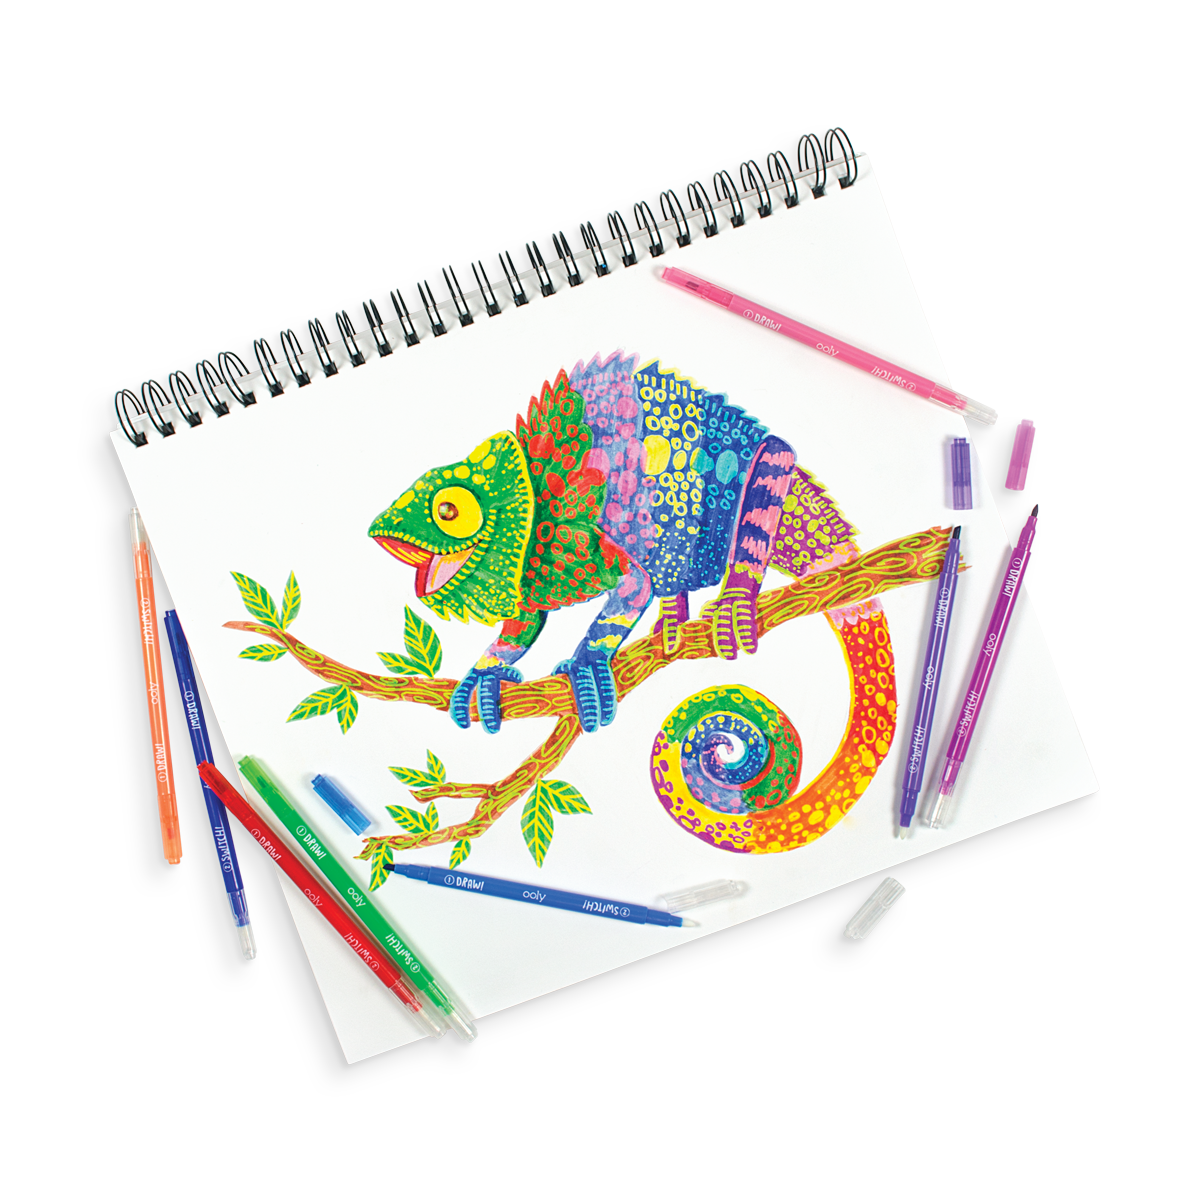 Drawing of a colorful chameleon in a sketchbook with Switch-Eroo Color Changing Markers around it